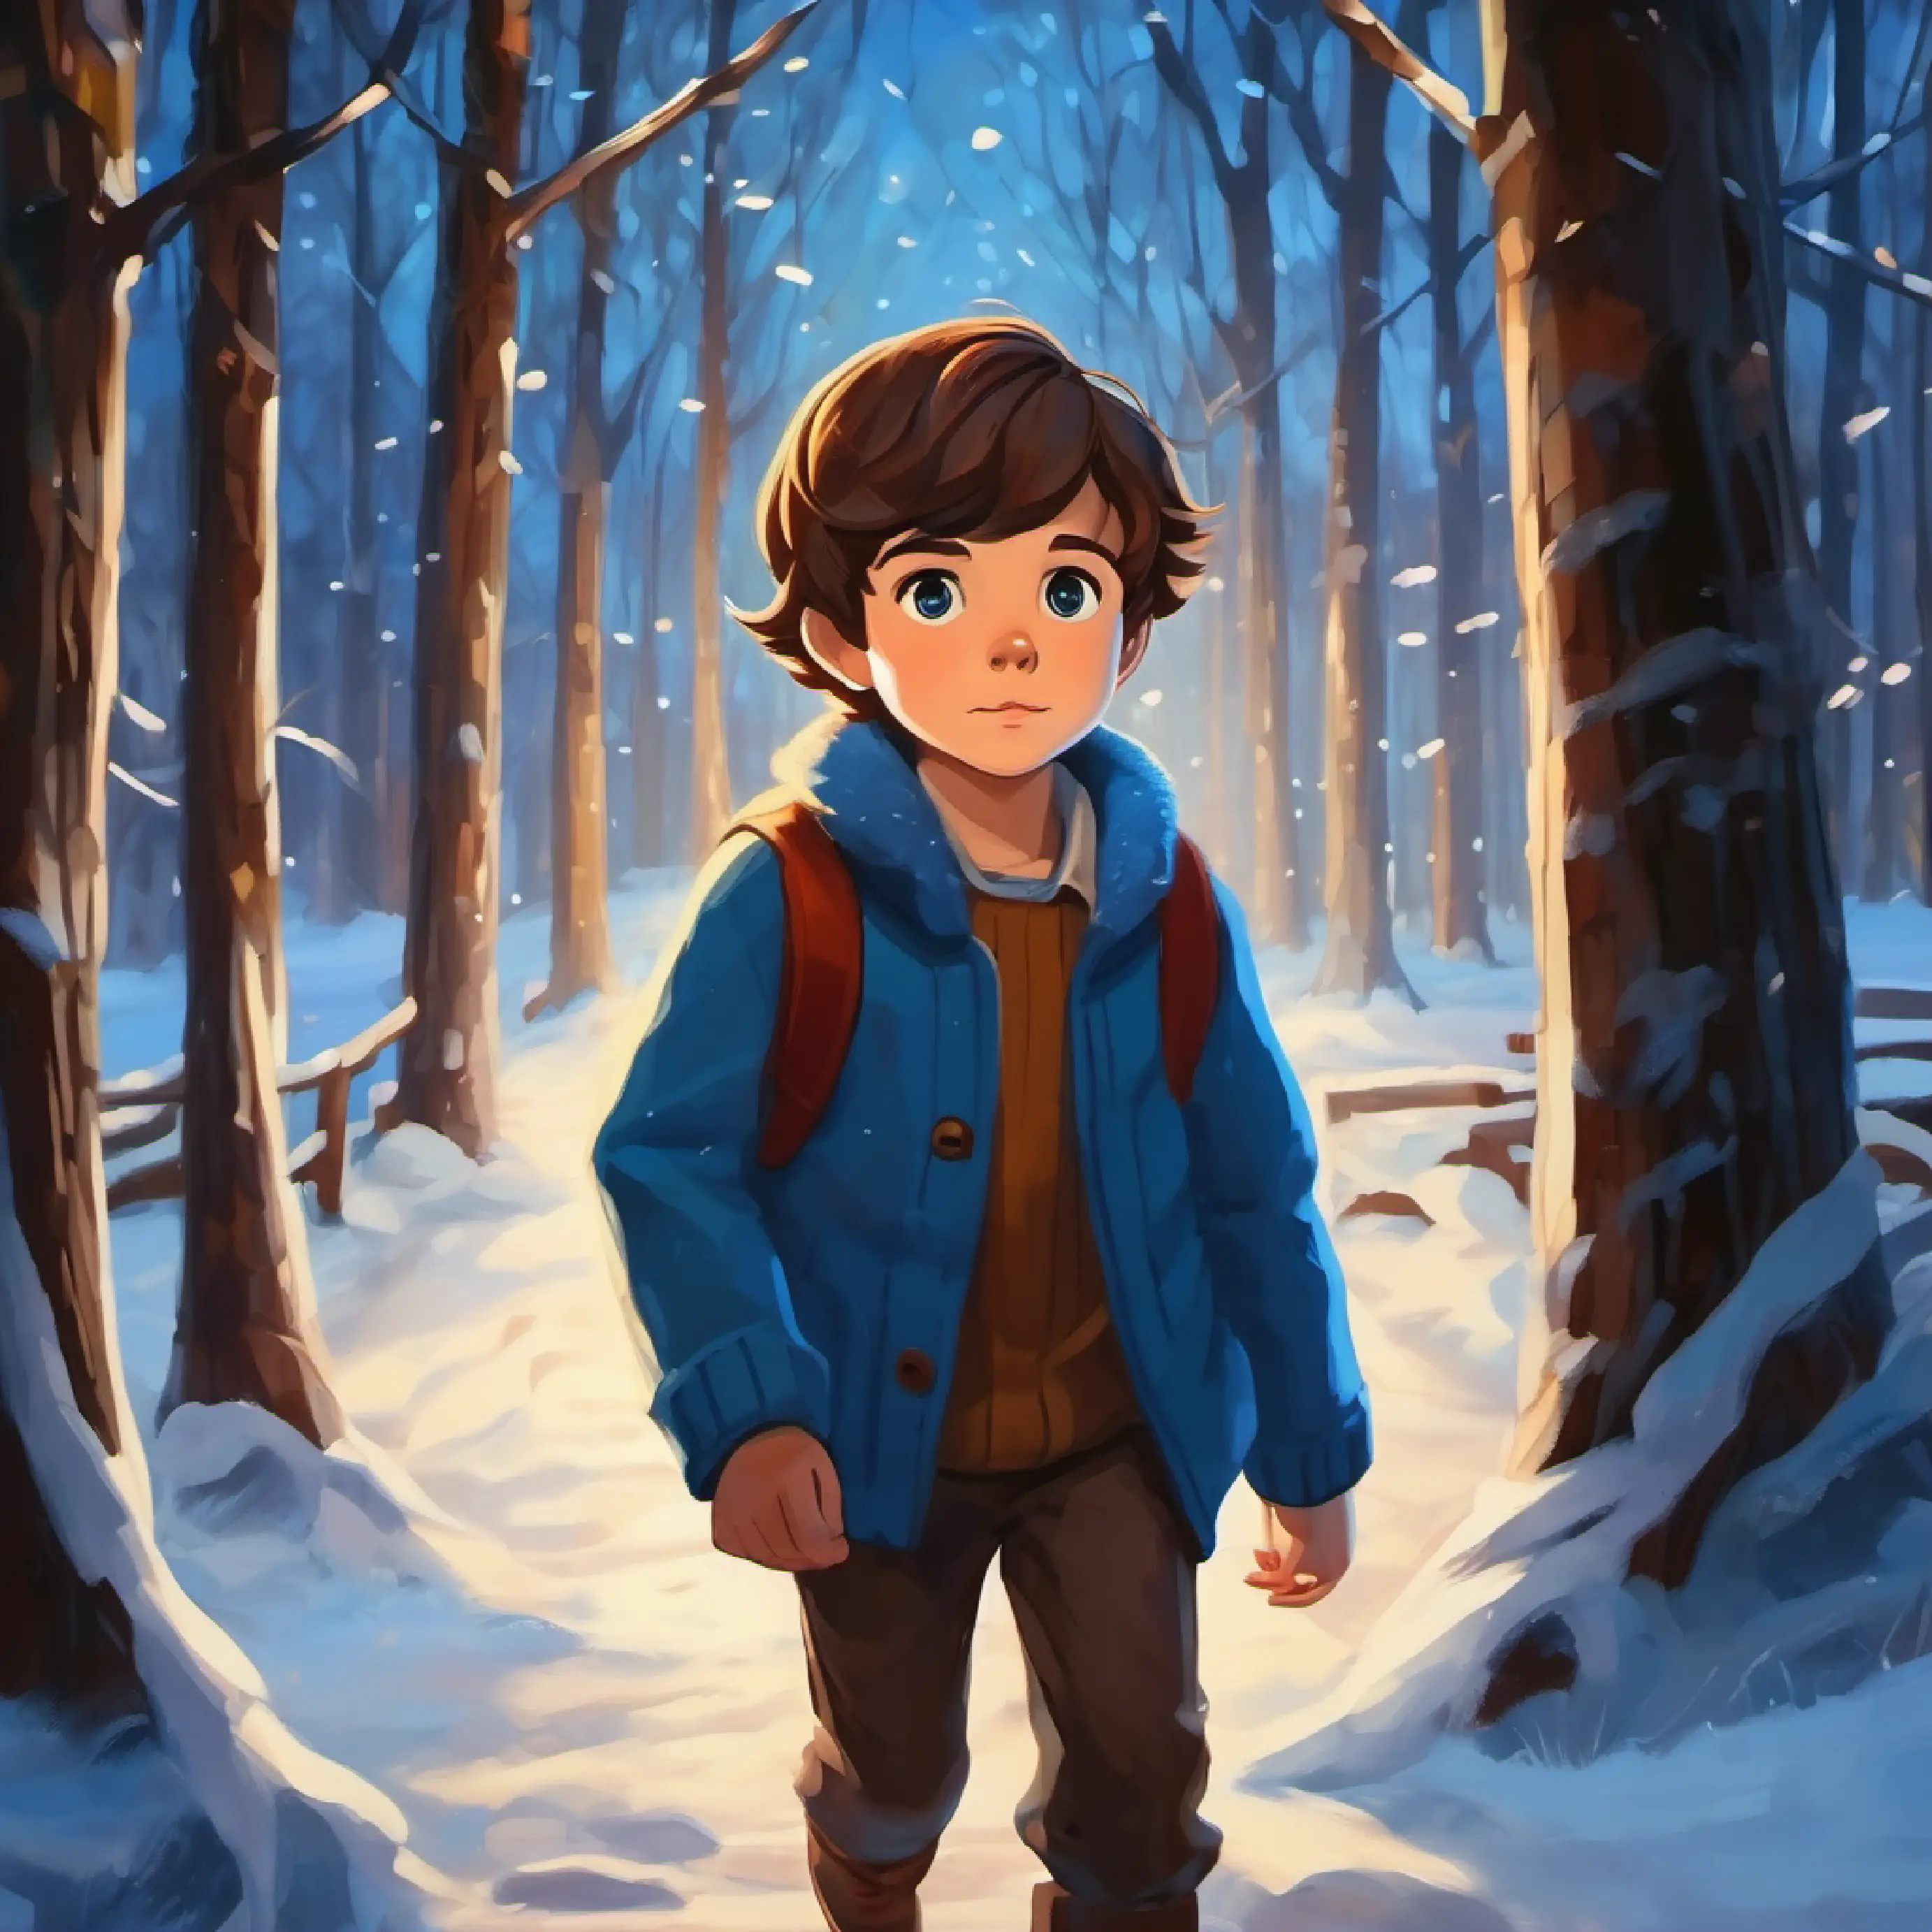 As the woods become dark, A young boy with brown hair and blue eyes decides to head home.